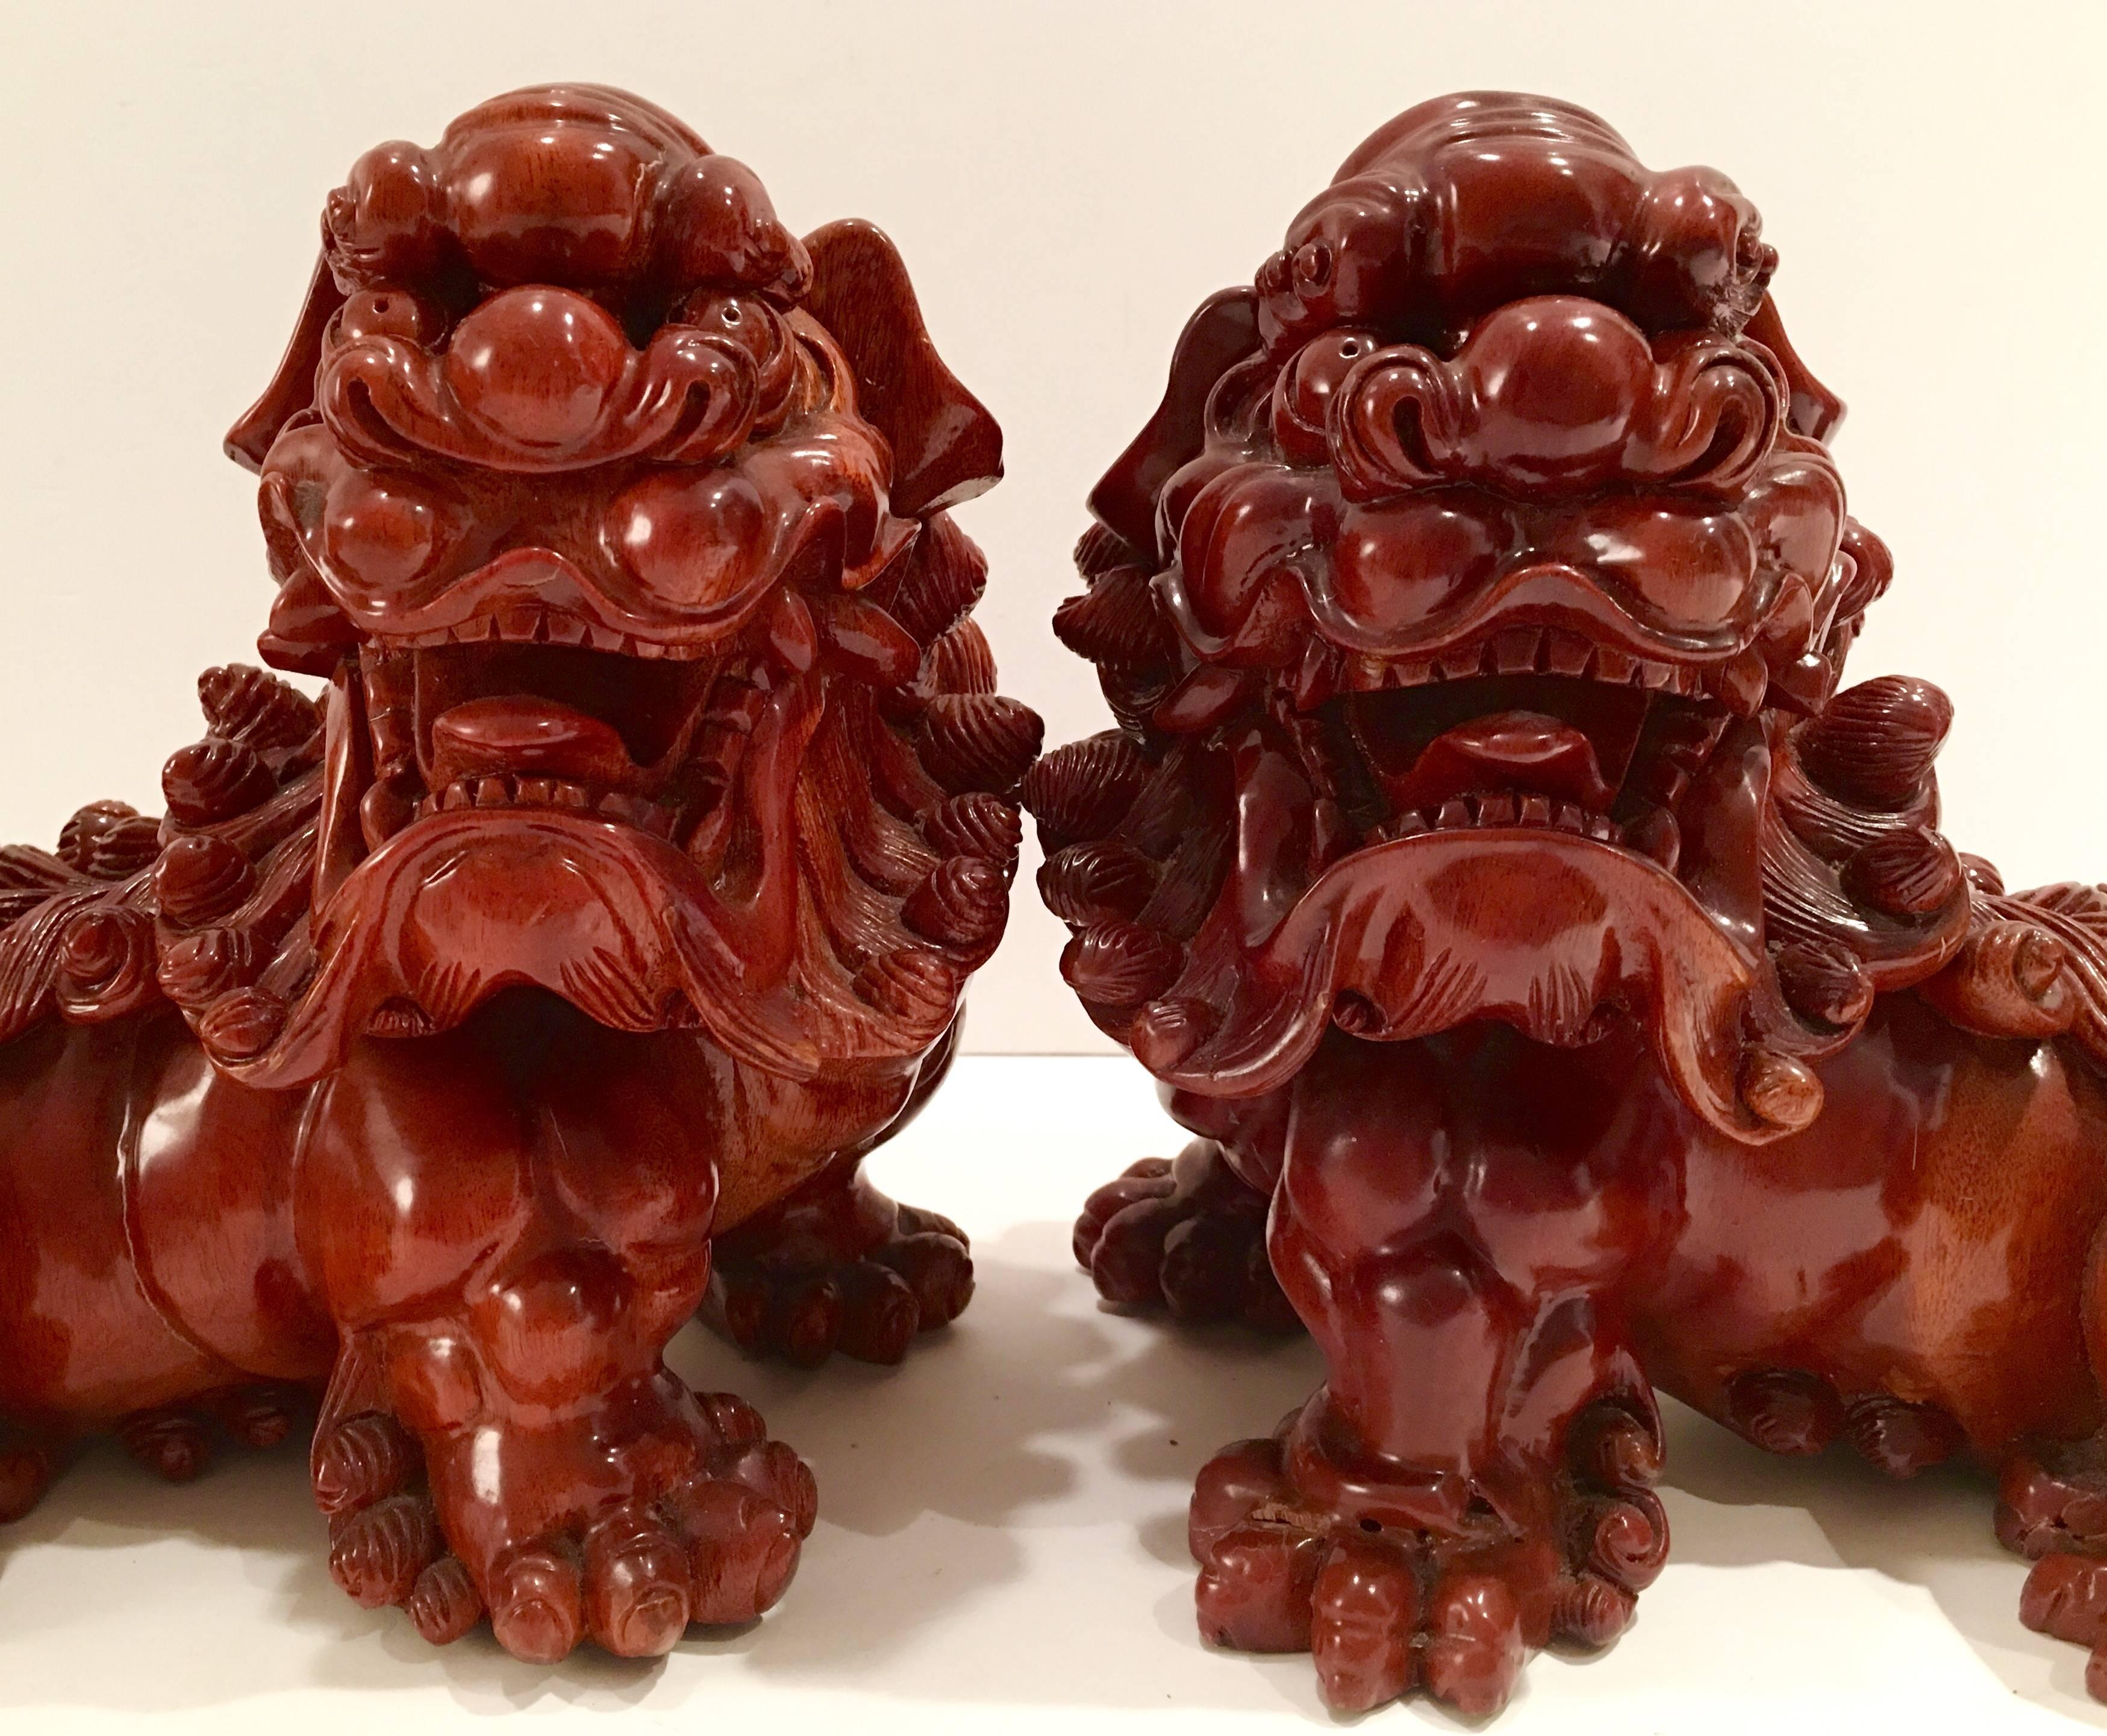 Large pair of antique hand-carved wood foo dogs. Incredible artisan craftsmanship with great attention to detail. High gloss clear lacquer finish.